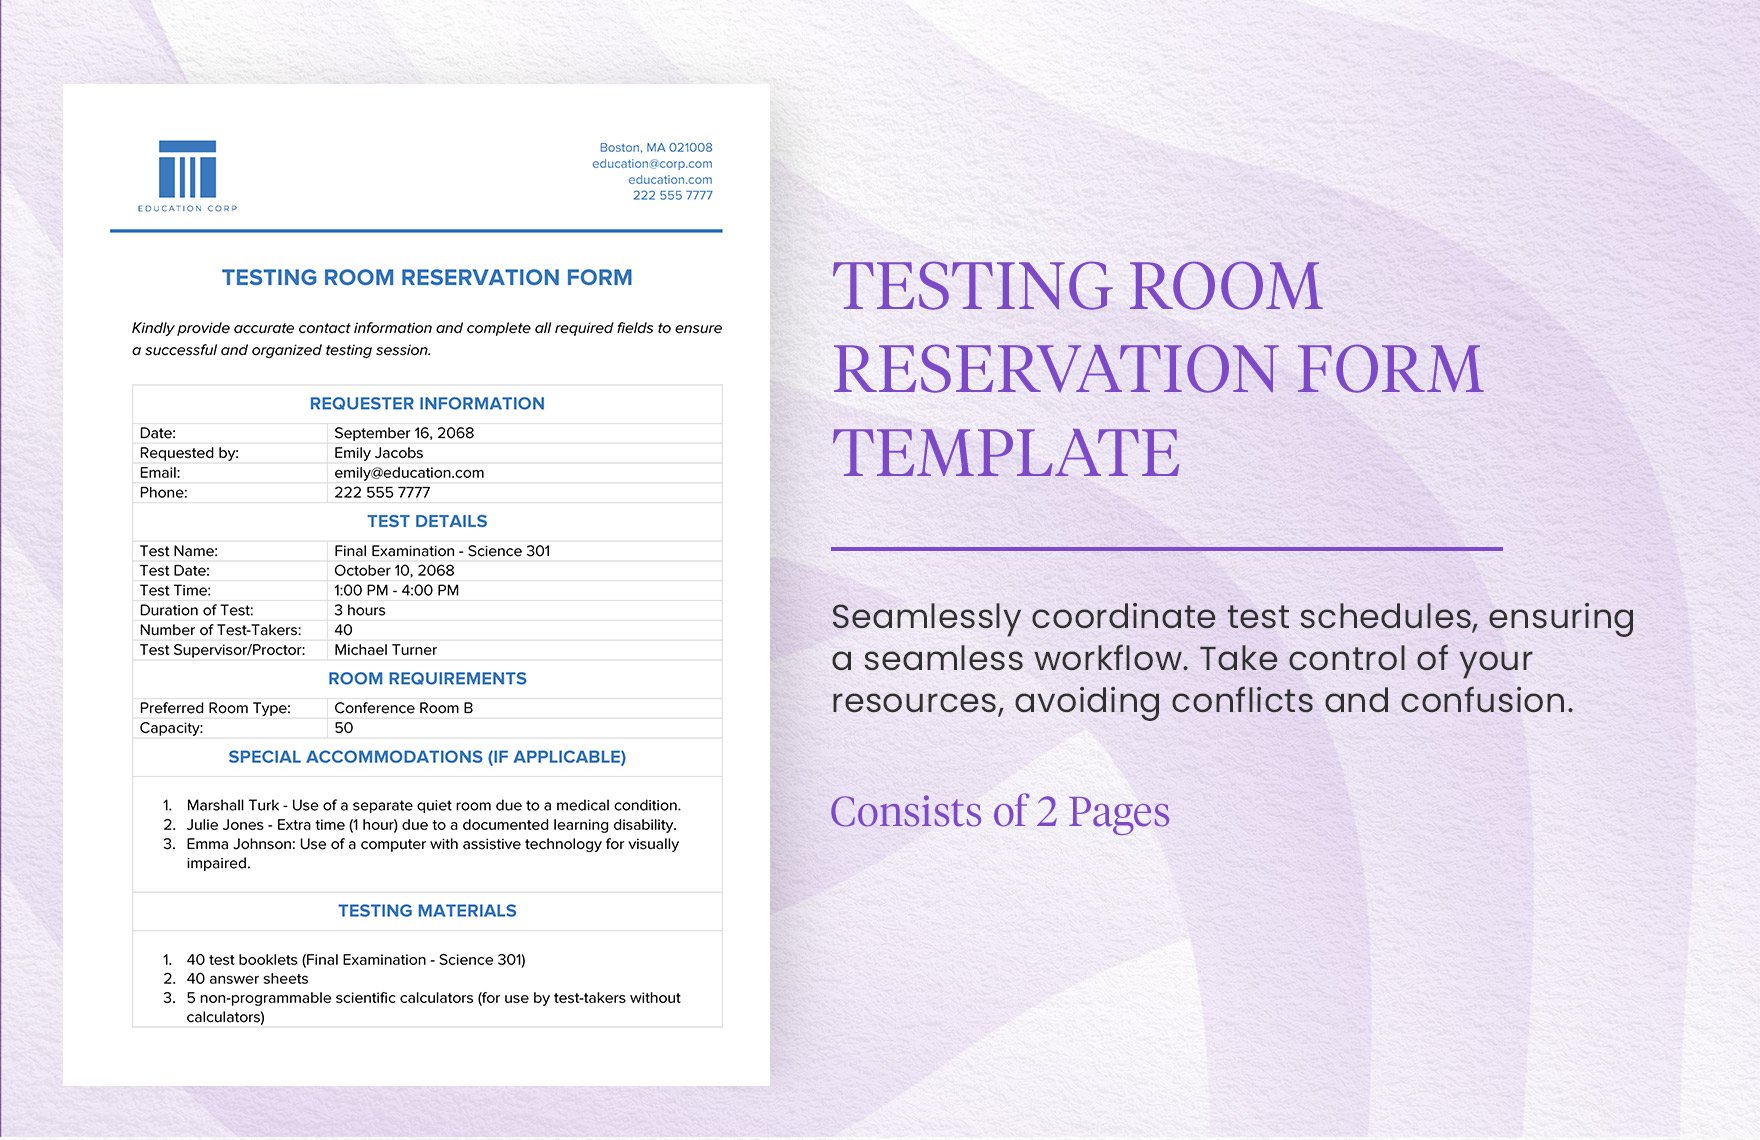 Testing Room Reservation Form Template in Word, Google Docs, PDF